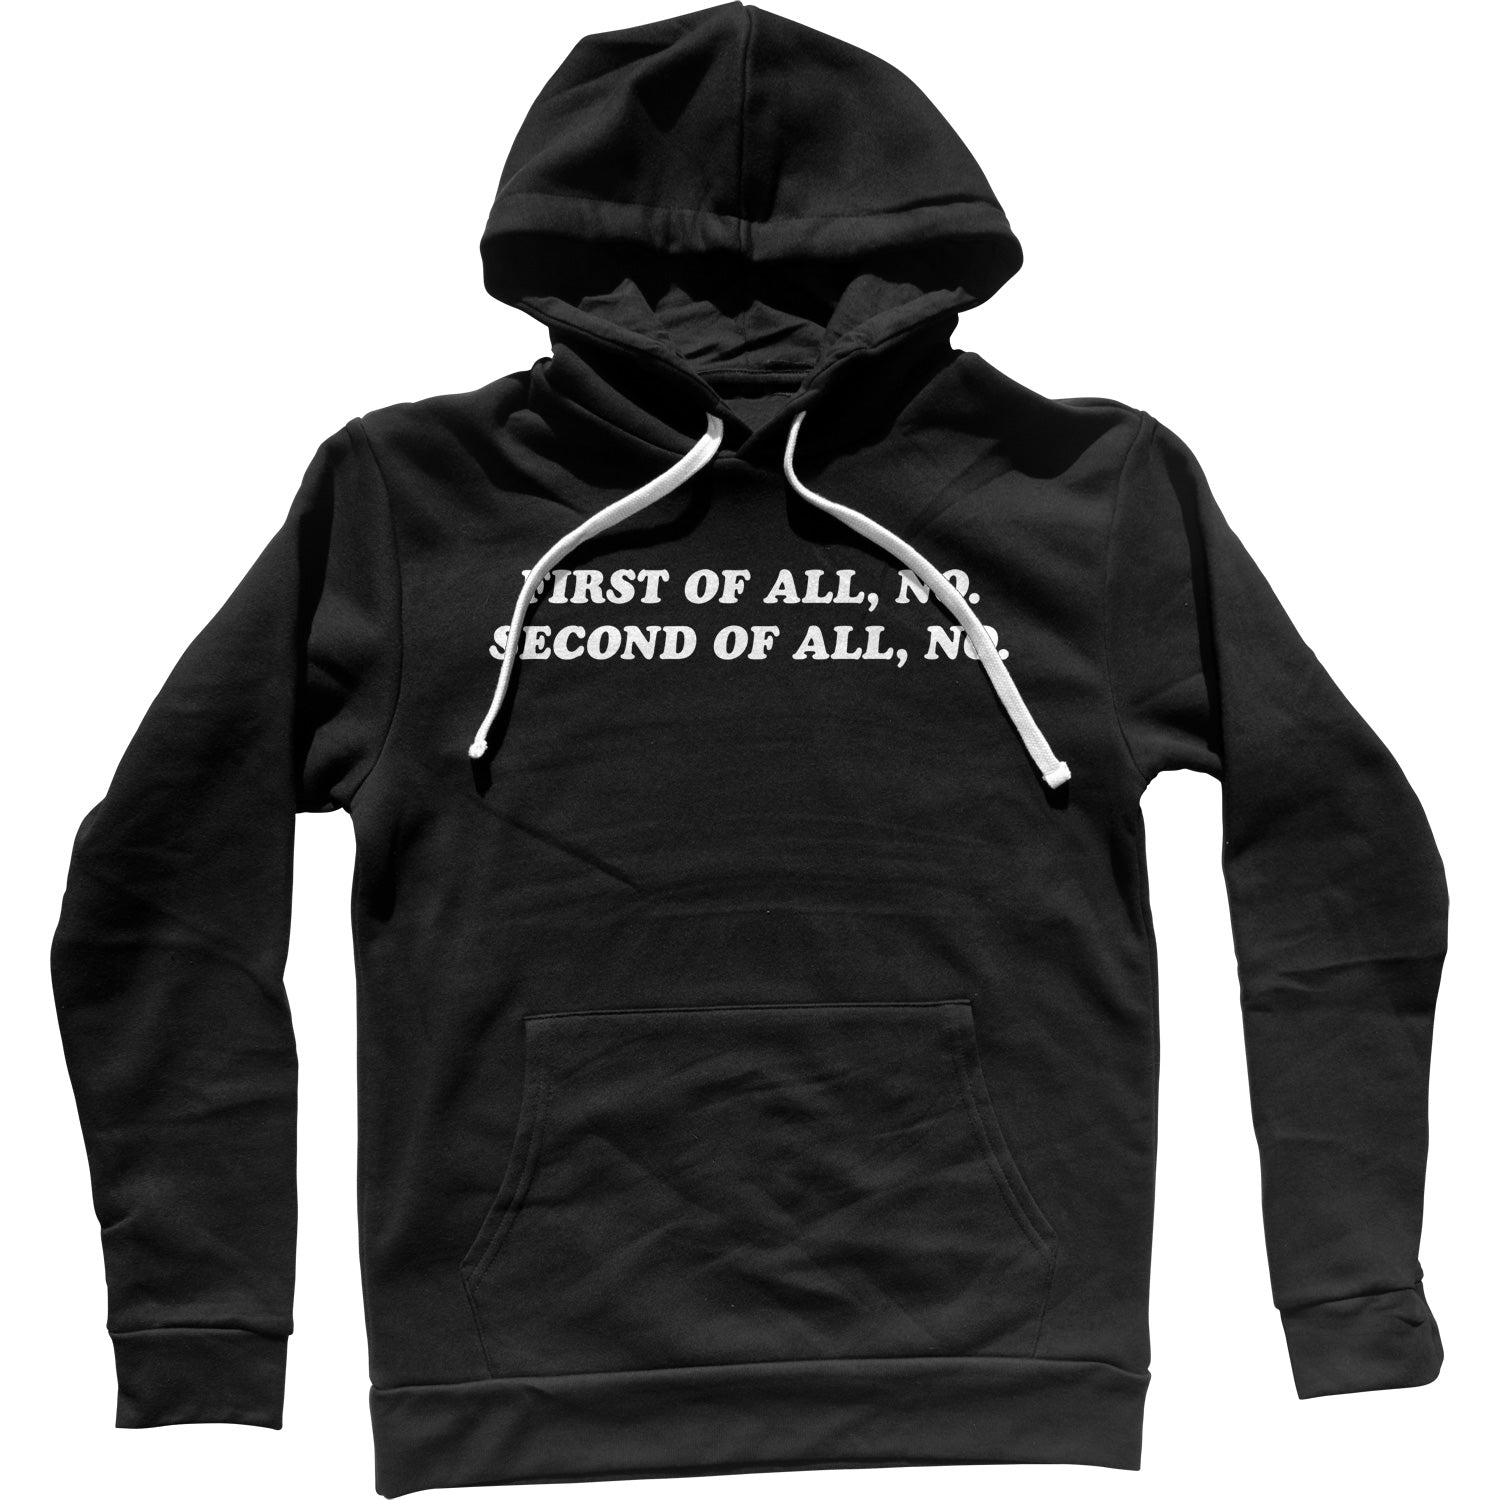 First of All No Second of All No Unisex Hoodie